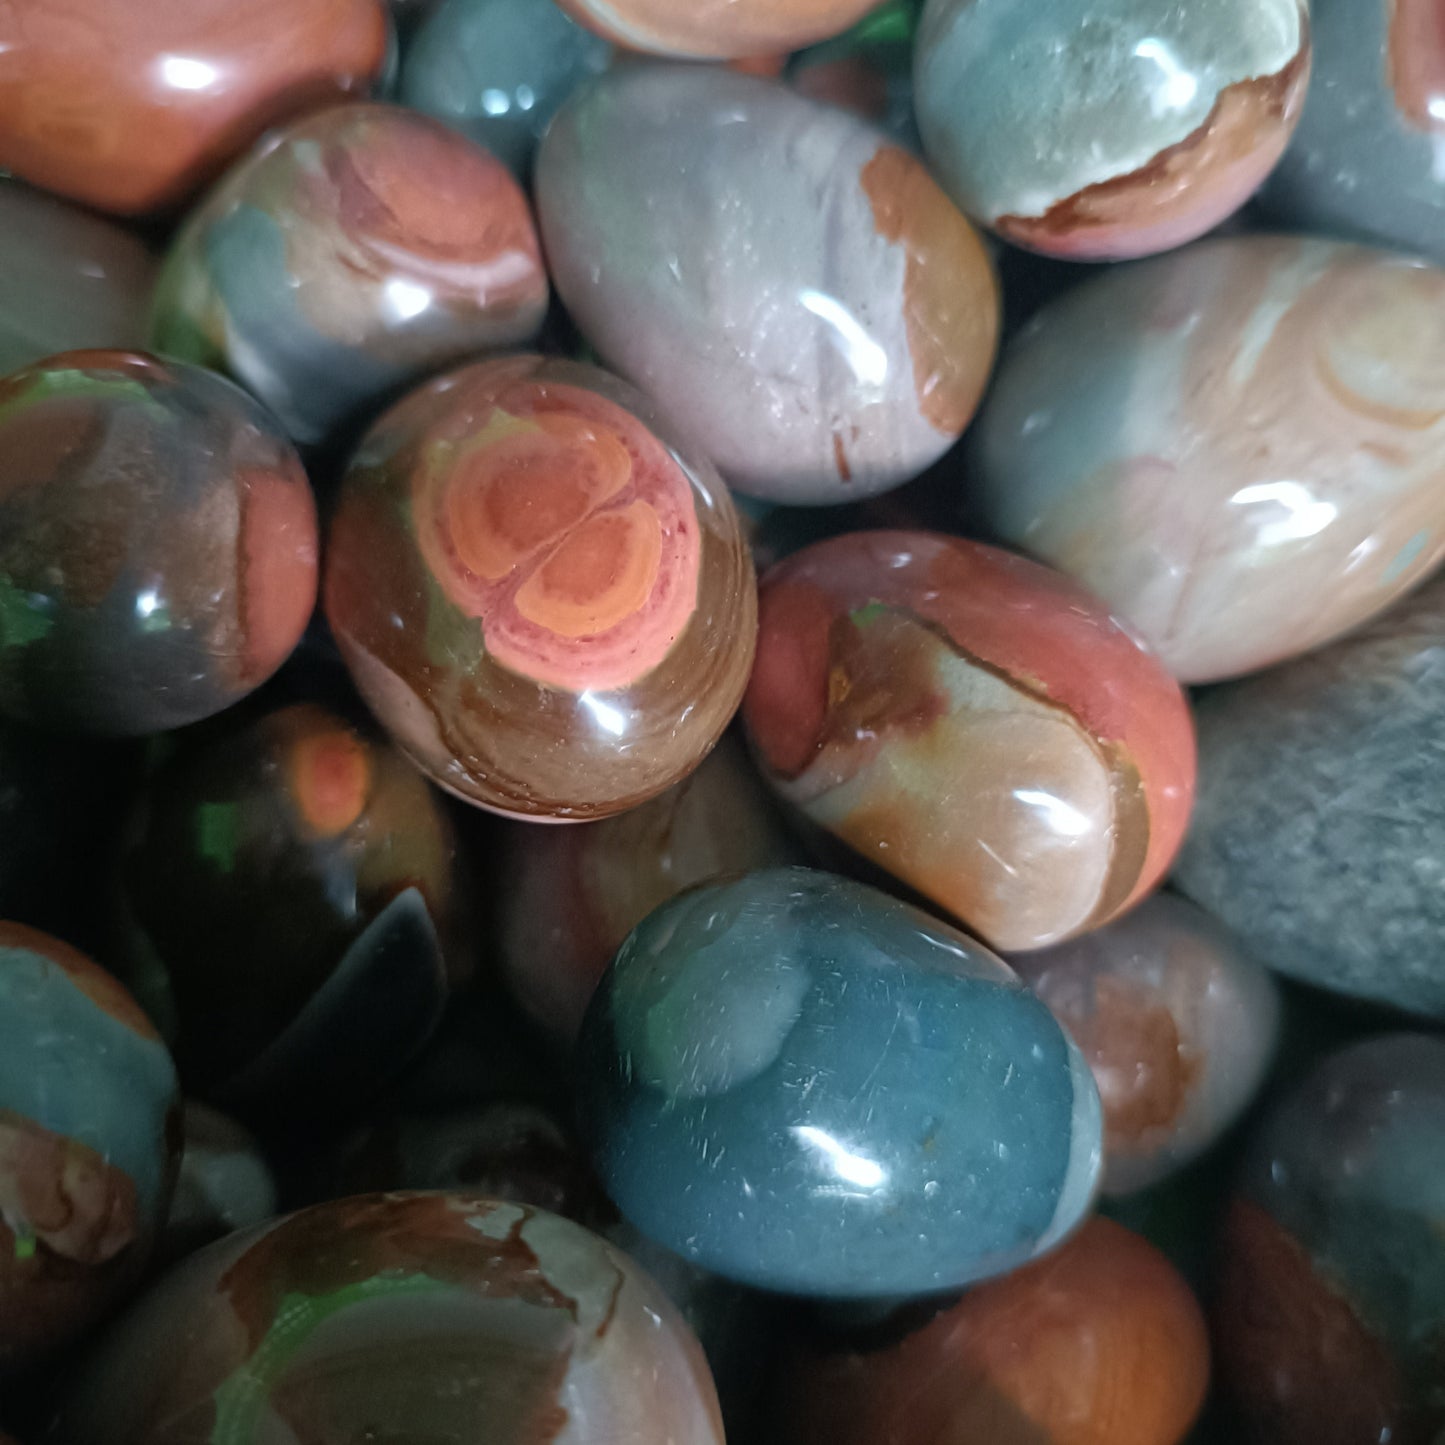 Buy 4 Pieces of Flower Agate Star Get 12 Extra Taking-No.3